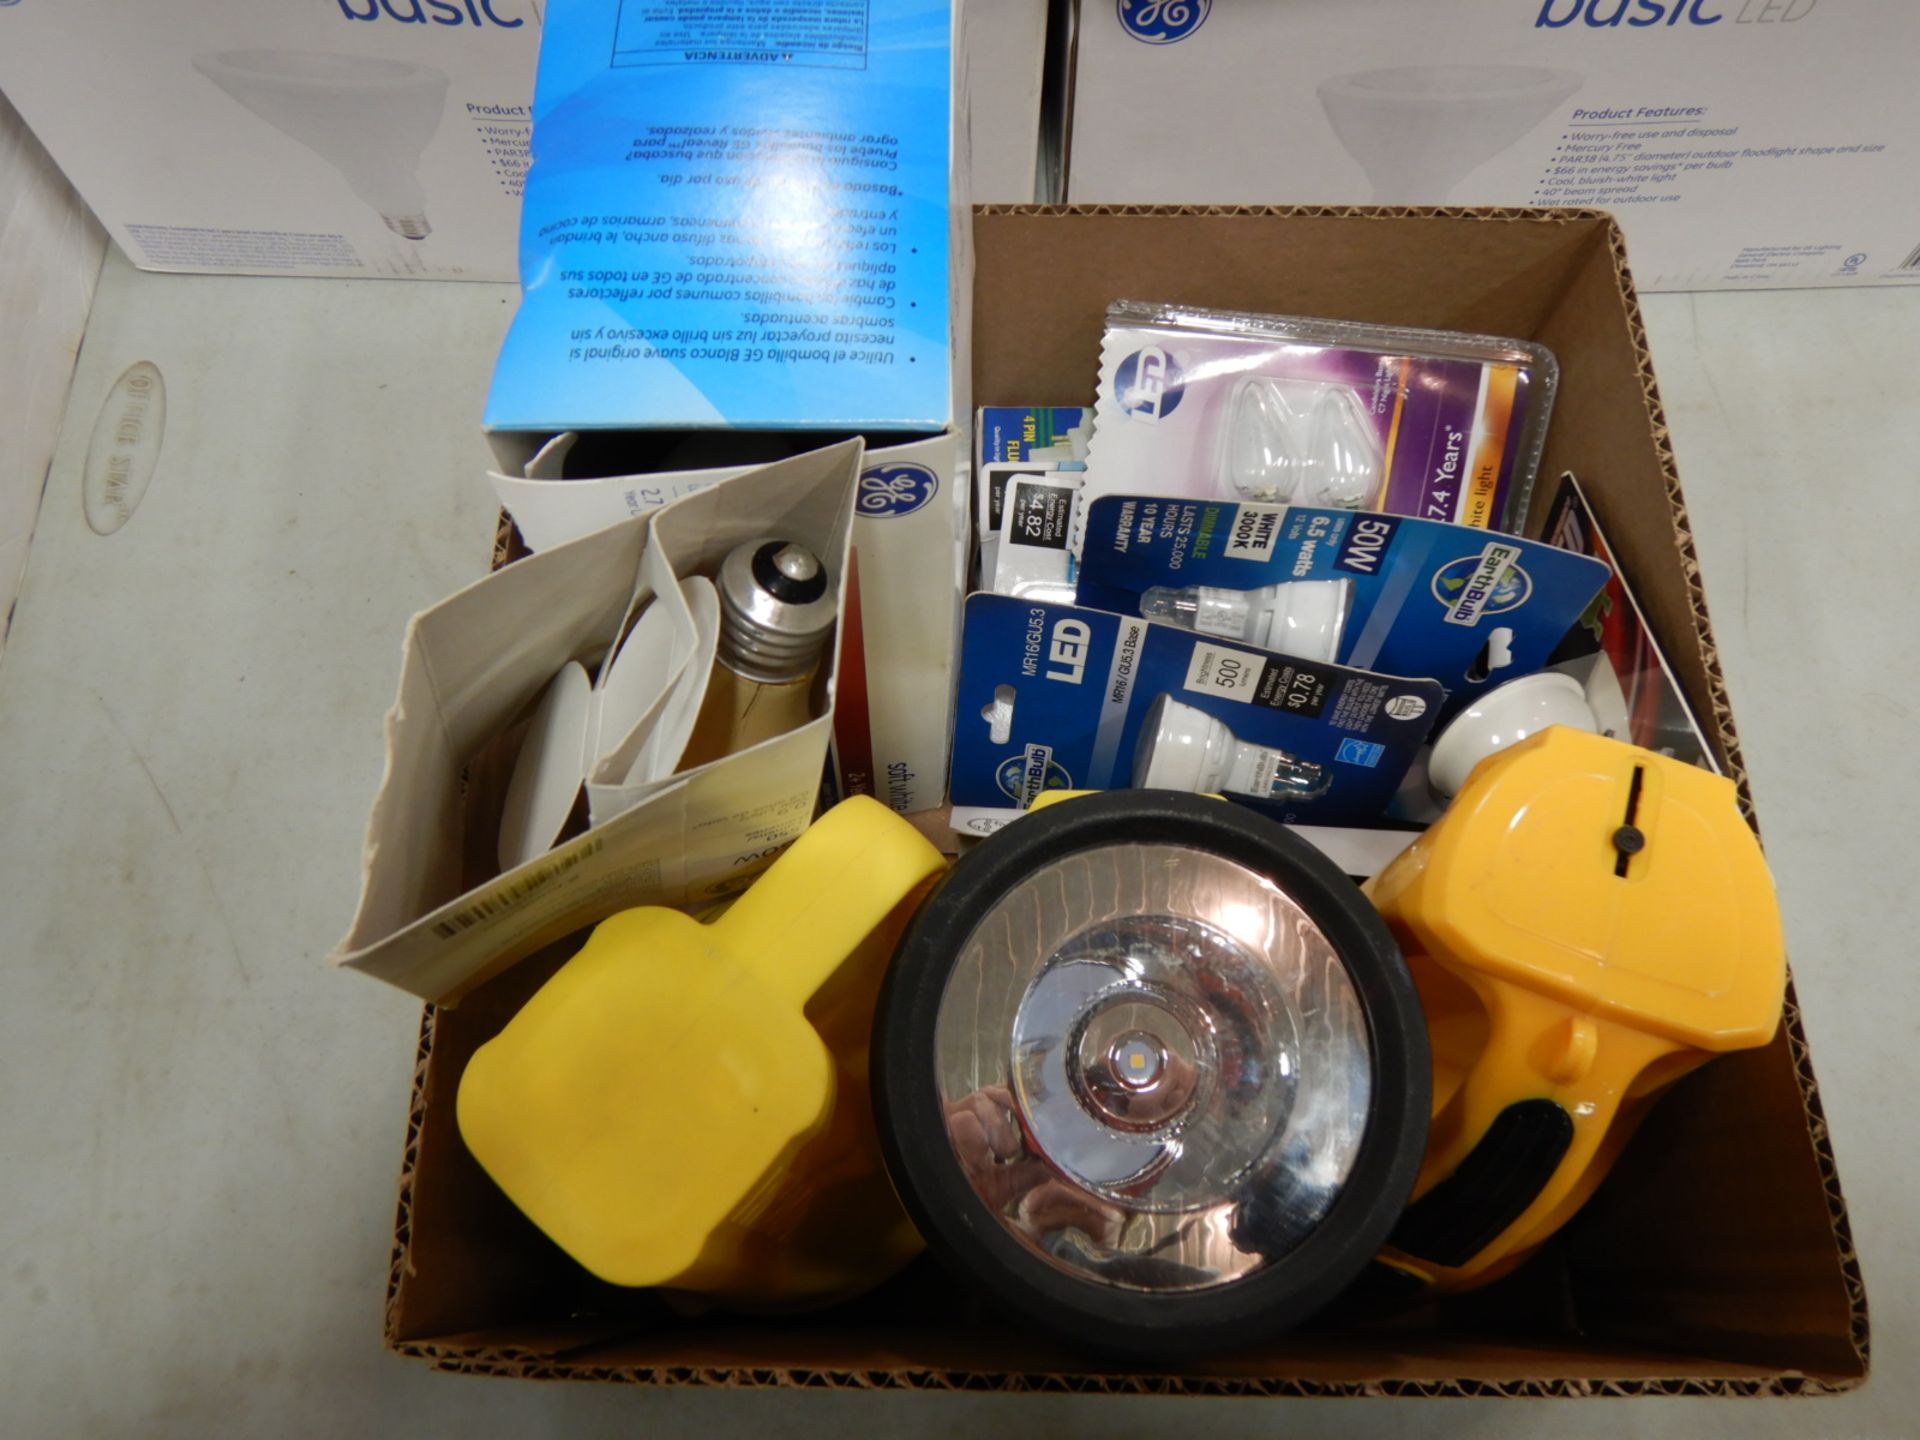 BASIC LED INDOOR/OUTDOOR FLOODLIGHTS, 4-BOXES W/ 6PER BOX, ECOSMART 60W REPLACEMENT LED NON-DIMMABLE - Image 2 of 3